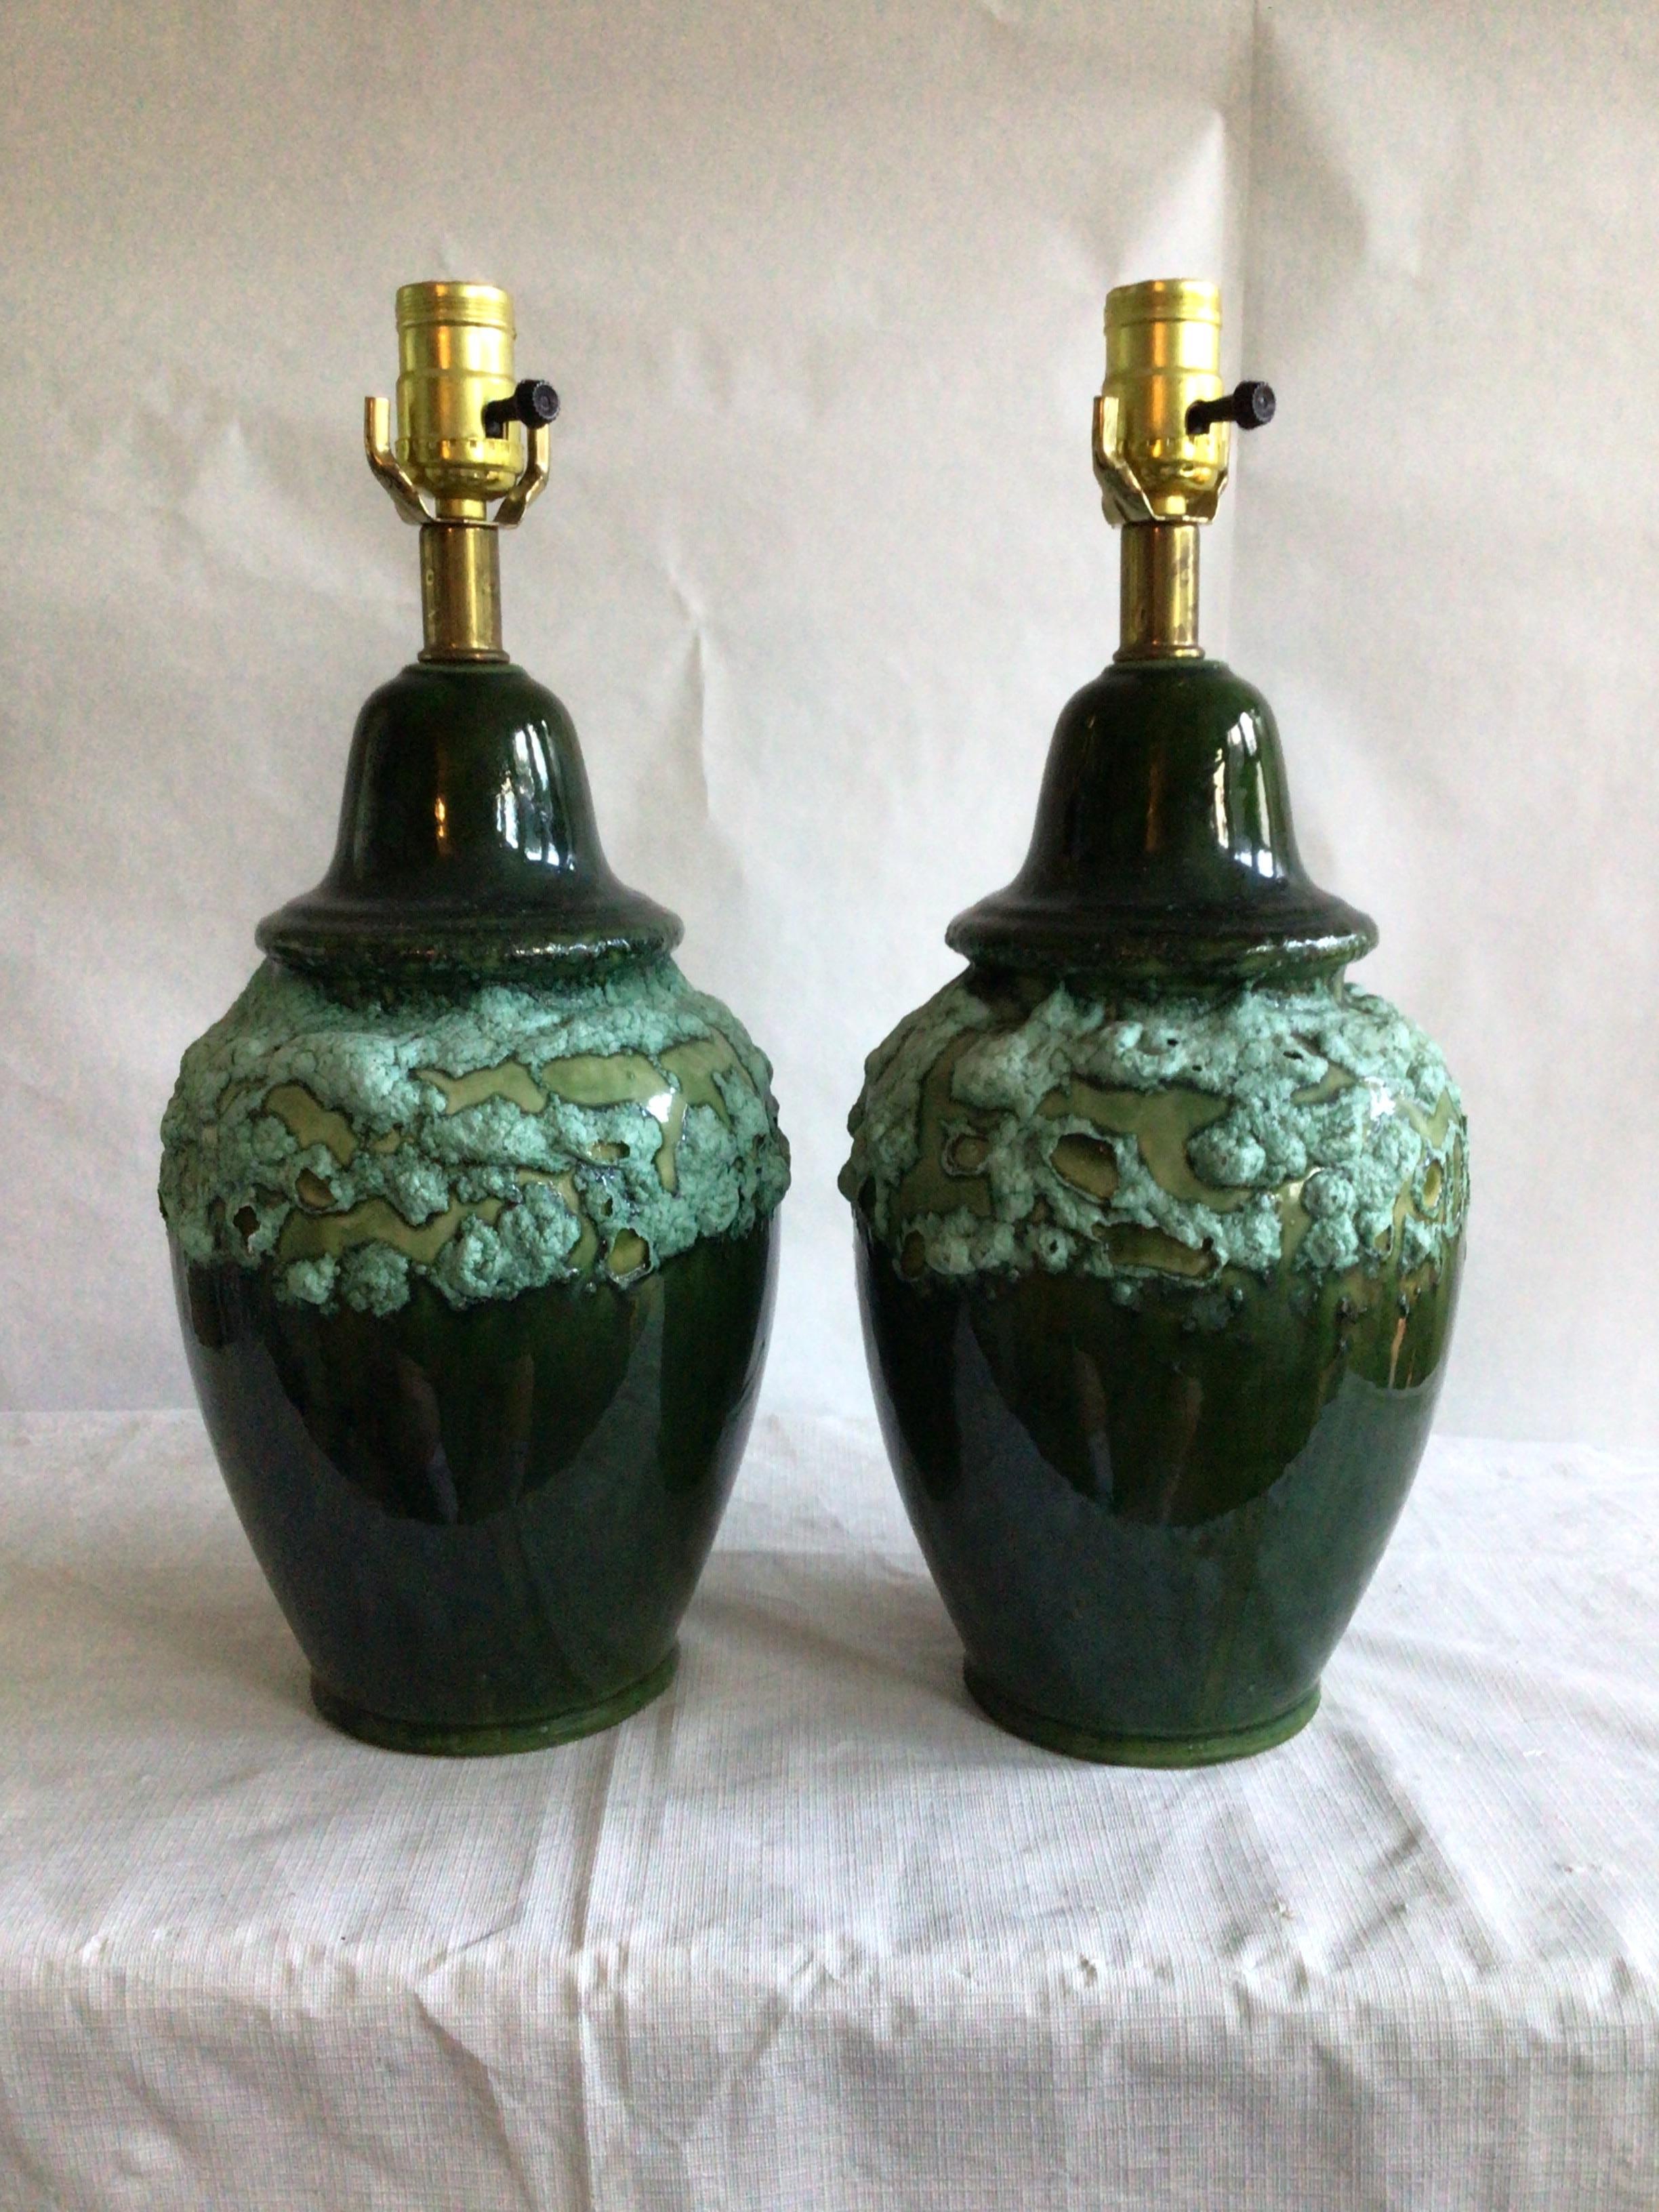 Pair of 1960s Textural Green Drip Glazed Lamps
Colors: Light greens from mint to moss are the textural accent combined with a darker drip glaze in a forest, pine, or darker green color
A perfect pair of lamps wherever light and a beautiful green